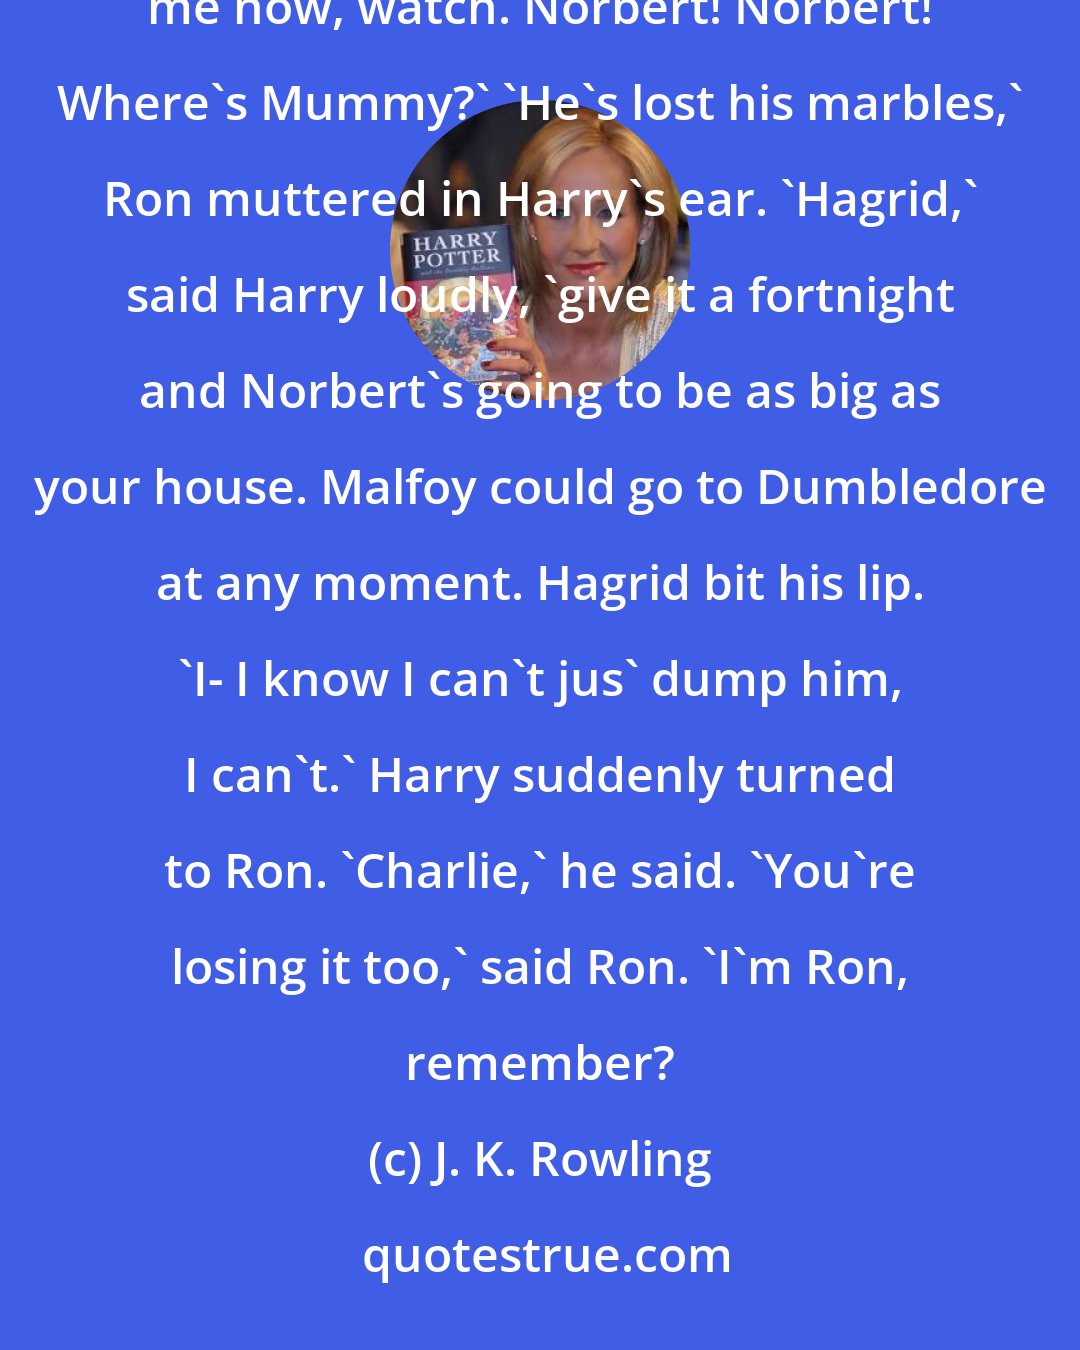 J. K. Rowling: I've decided to call him Norbert,' said Hagrid, looking at the dragon with misty eyes. 'He really knows me now, watch. Norbert! Norbert! Where's Mummy?' 'He's lost his marbles,' Ron muttered in Harry's ear. 'Hagrid,' said Harry loudly, 'give it a fortnight and Norbert's going to be as big as your house. Malfoy could go to Dumbledore at any moment. Hagrid bit his lip. 'I- I know I can't jus' dump him, I can't.' Harry suddenly turned to Ron. 'Charlie,' he said. 'You're losing it too,' said Ron. 'I'm Ron, remember?